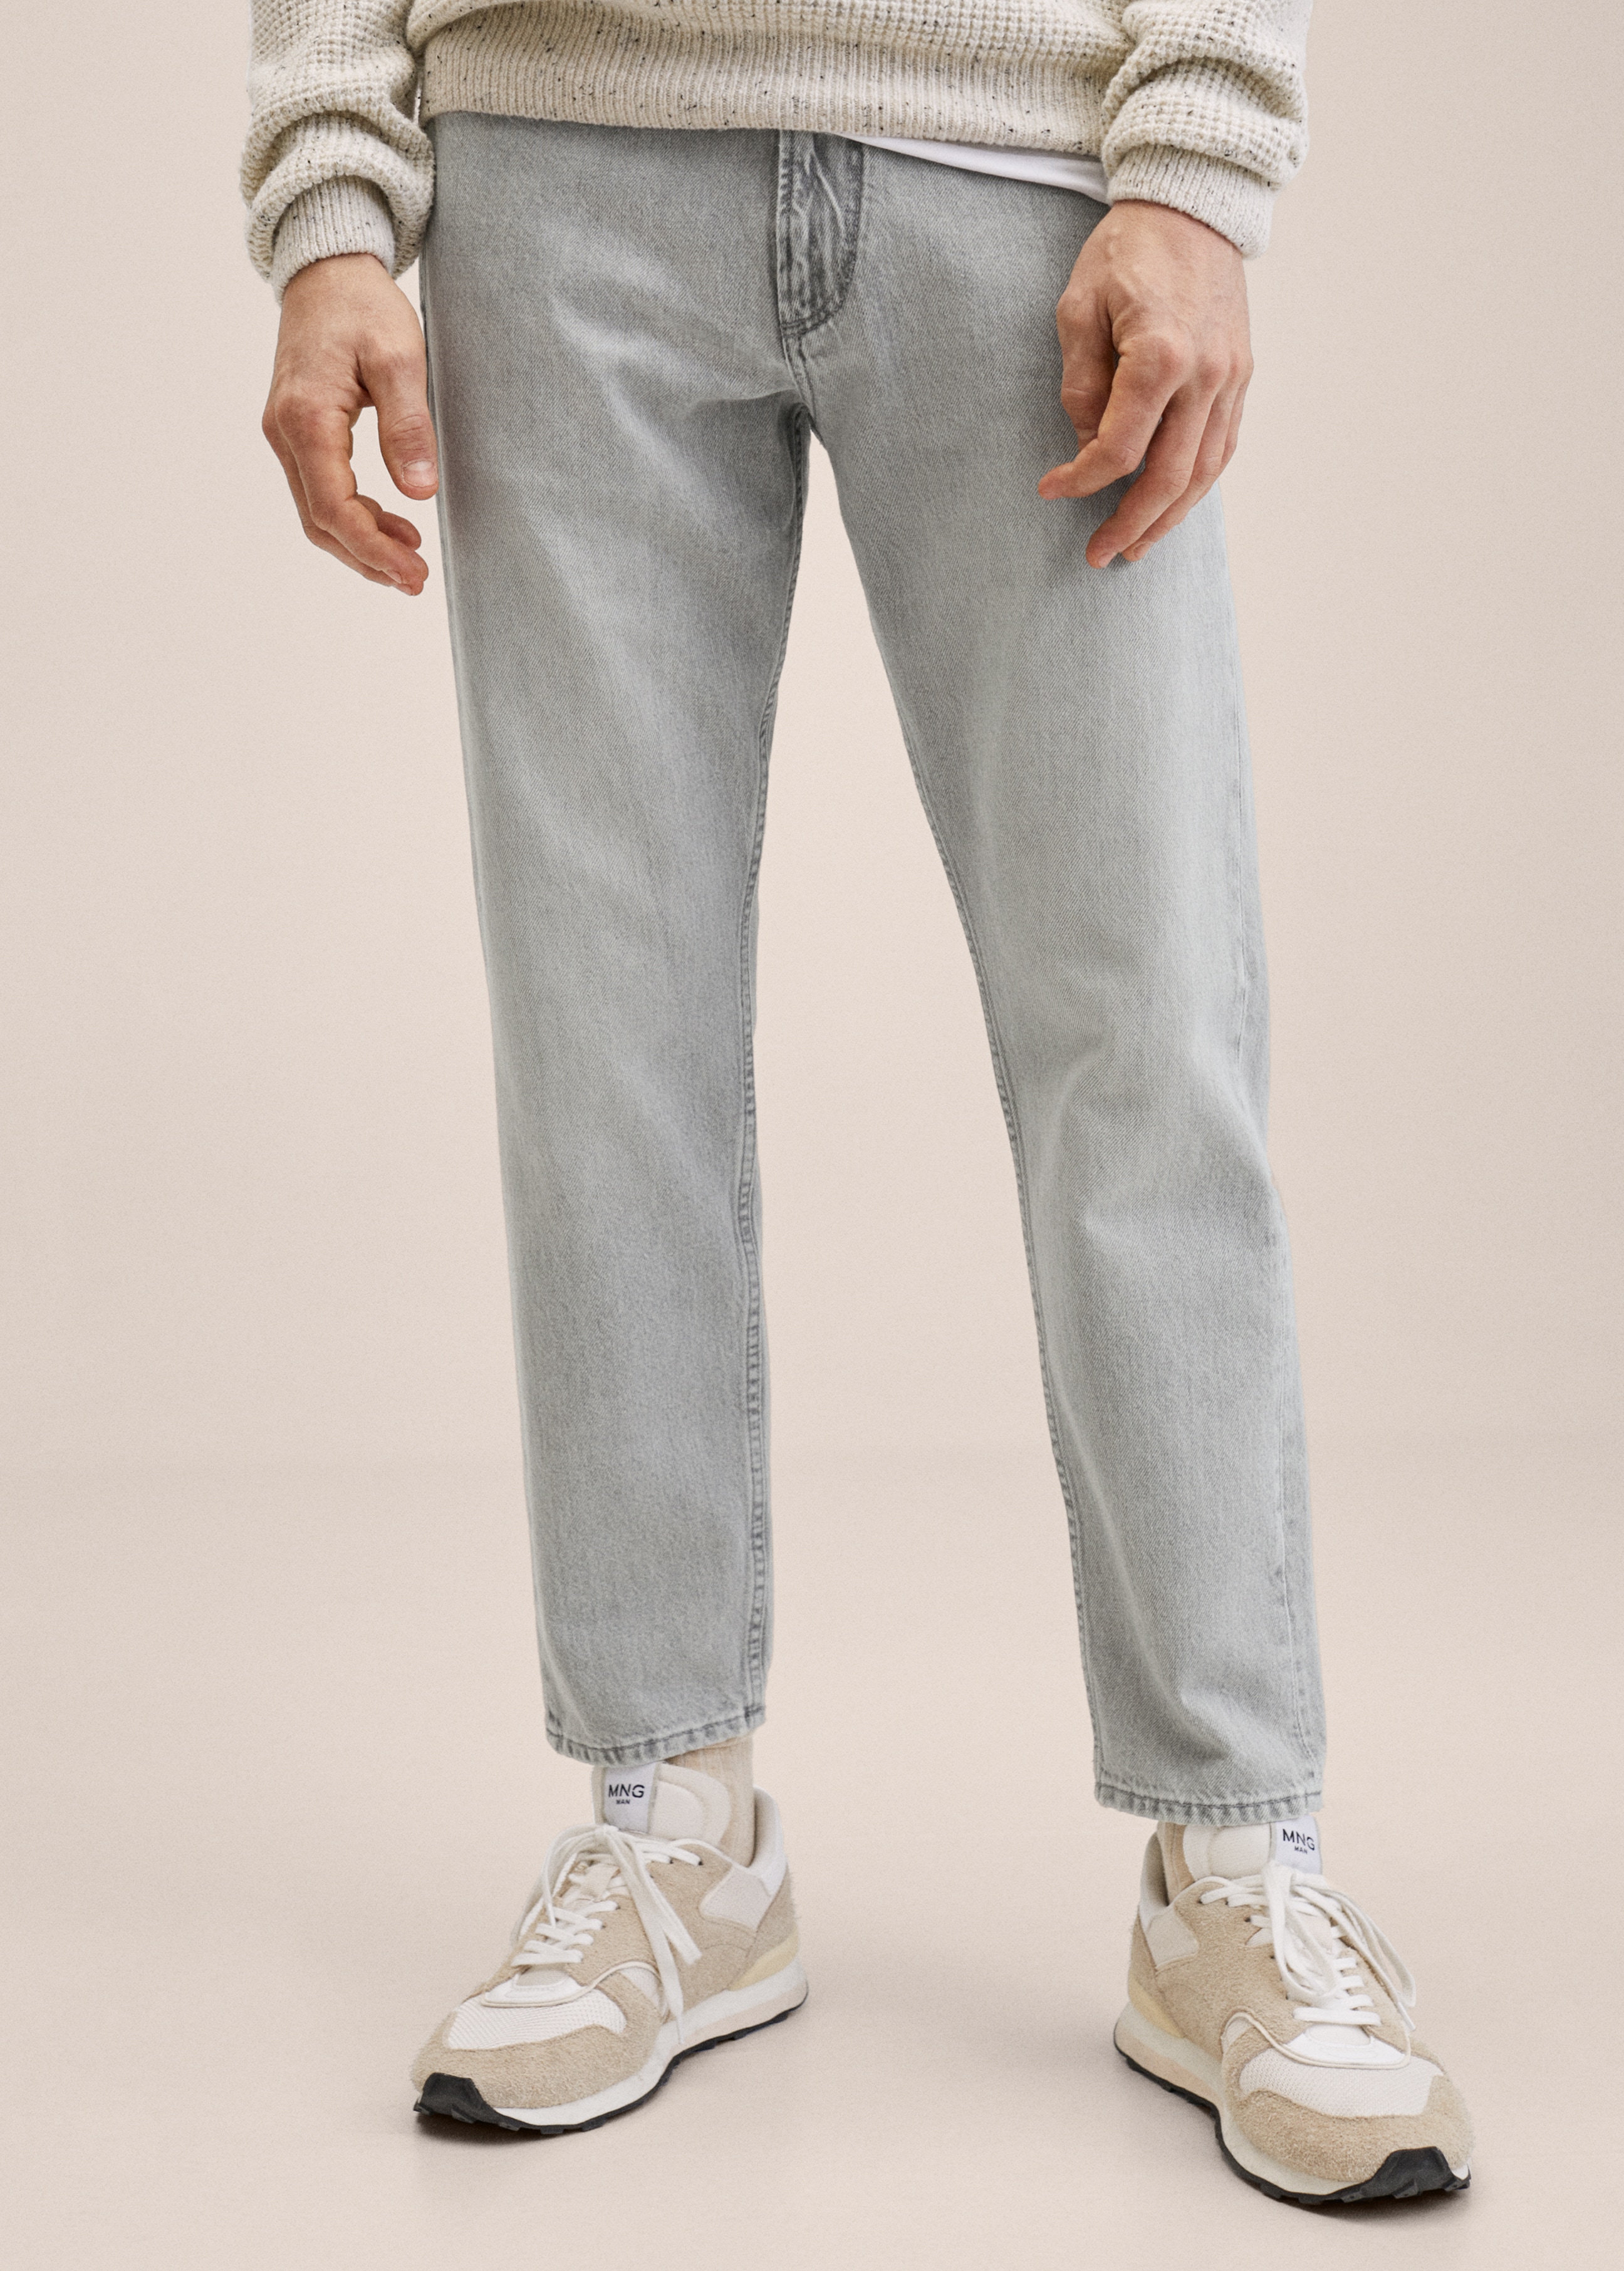 Texans Ben tapered cropped - Pla mig